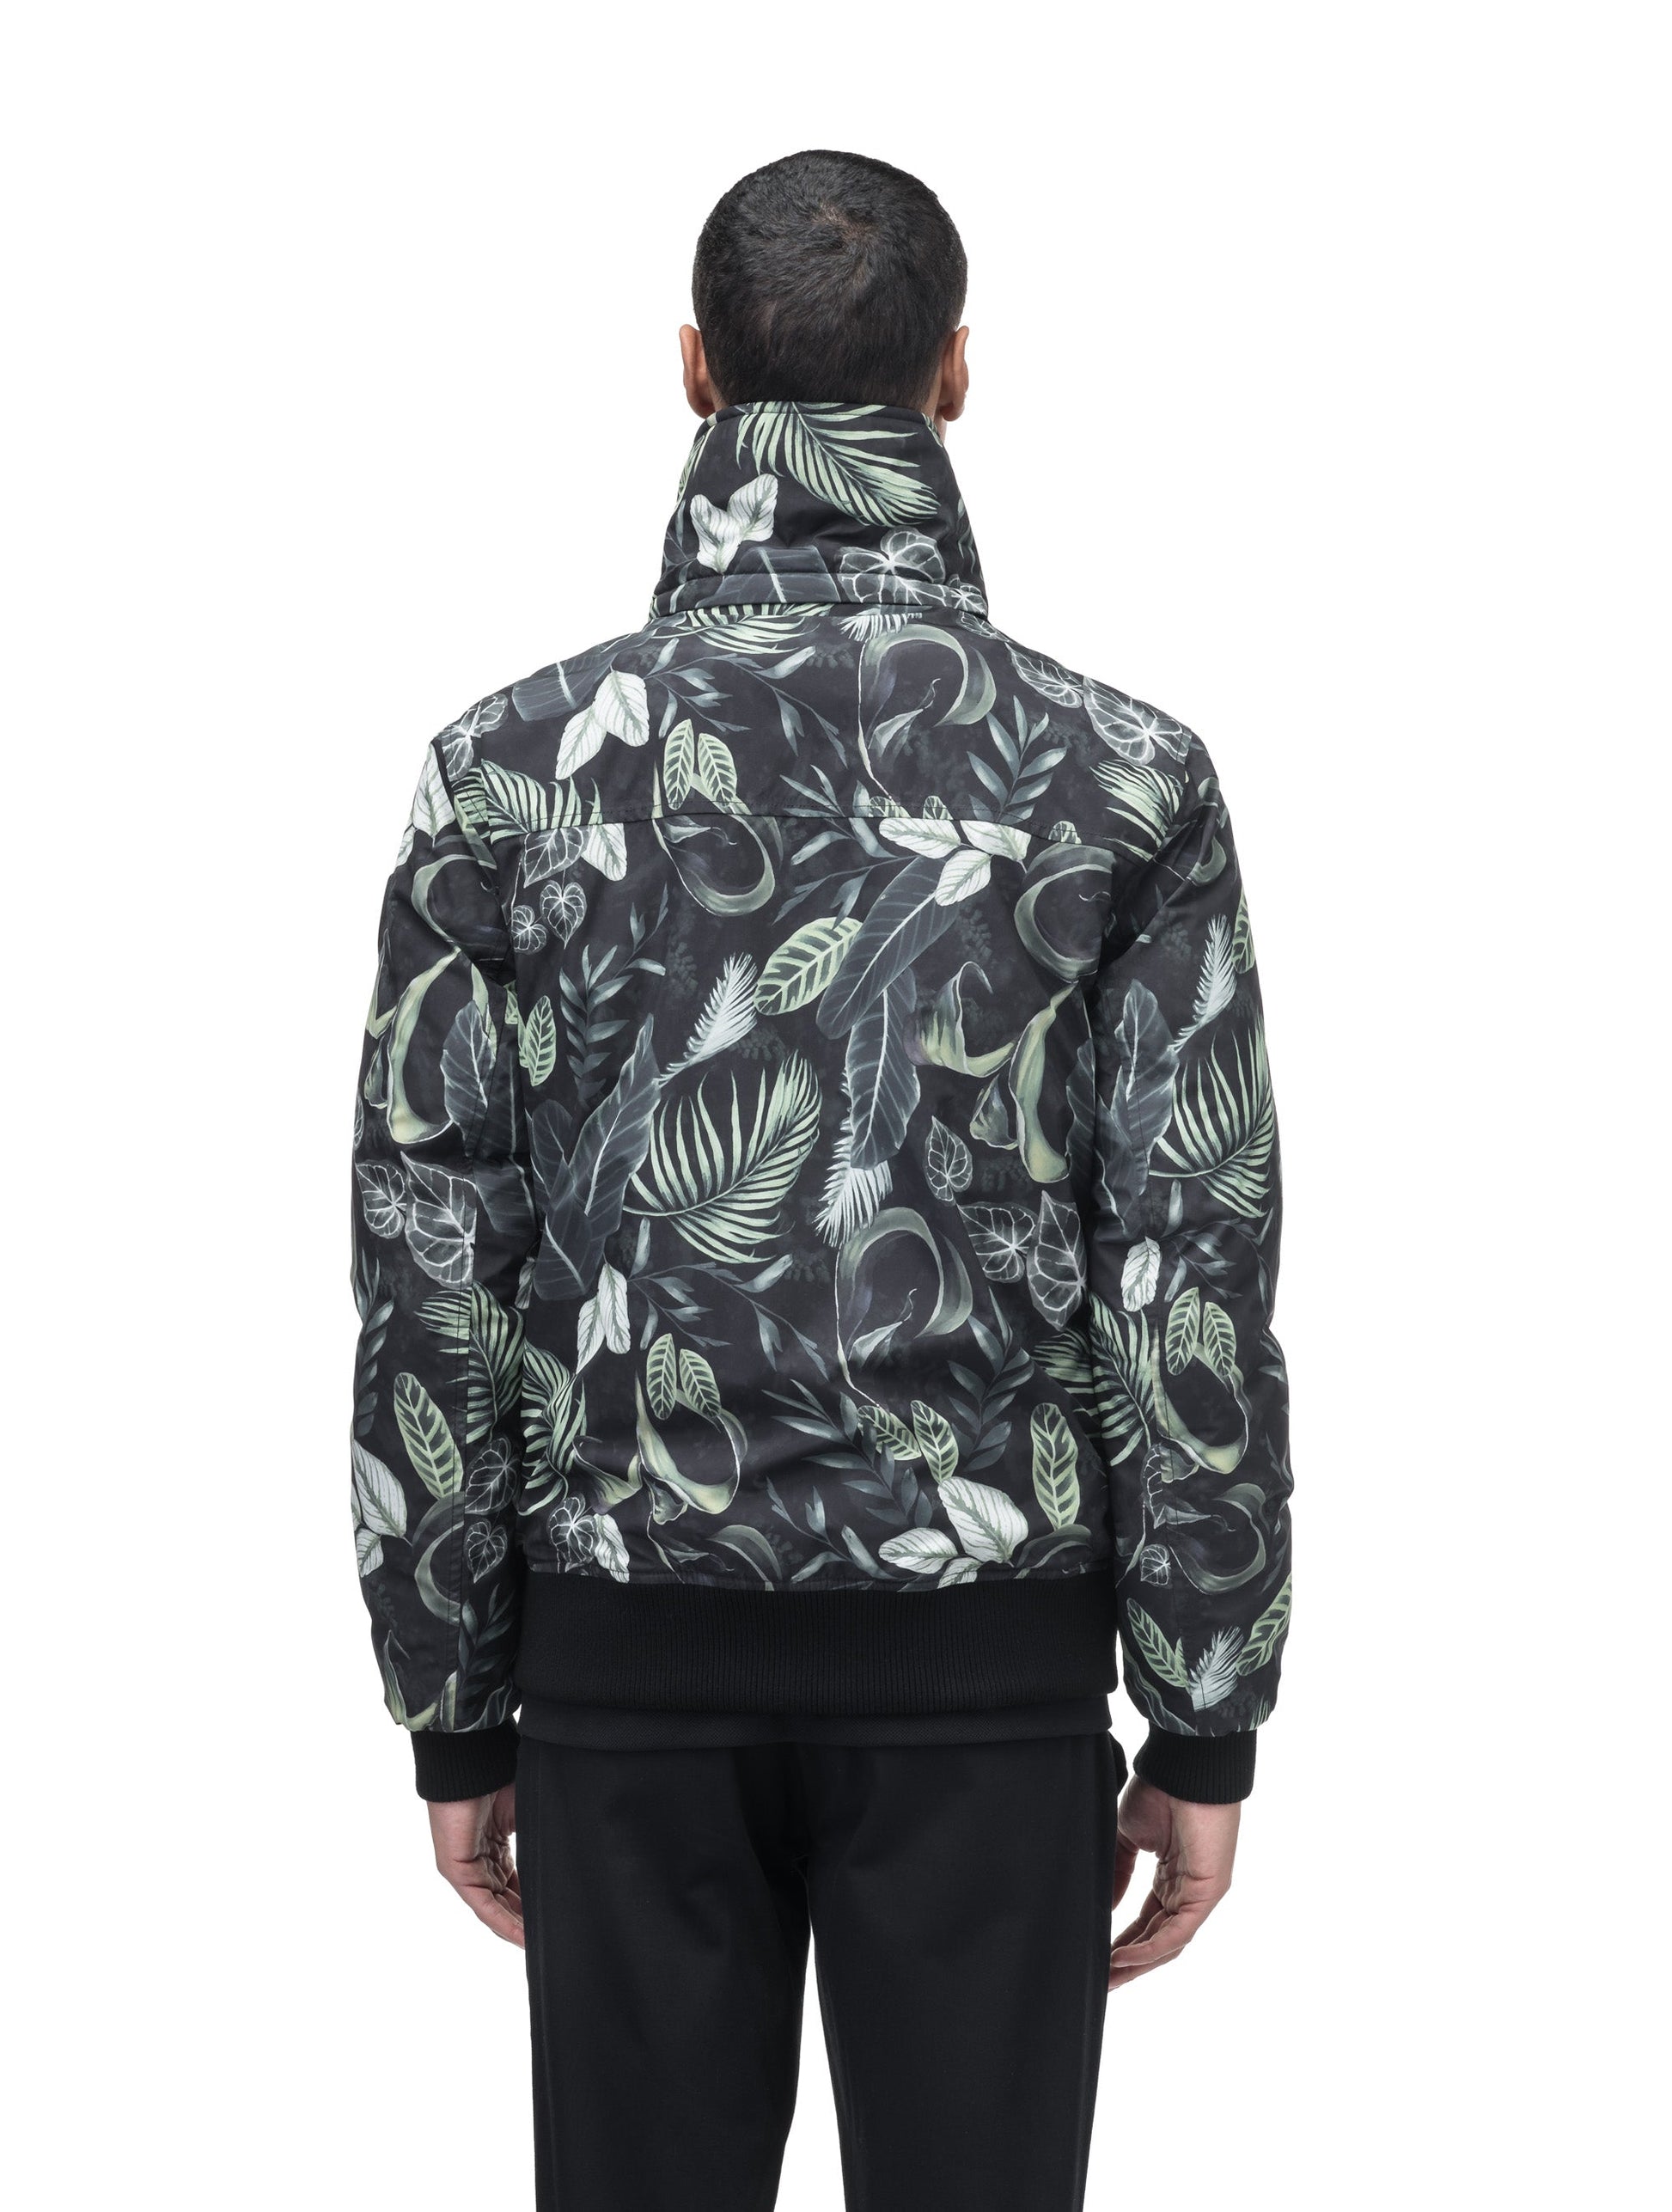 Sonar Men's Aviator Jacket in hip length, Canadian duck down insulation, removable shearling collar with hidden tuckable hood, and two-way front zipper, in Foliage